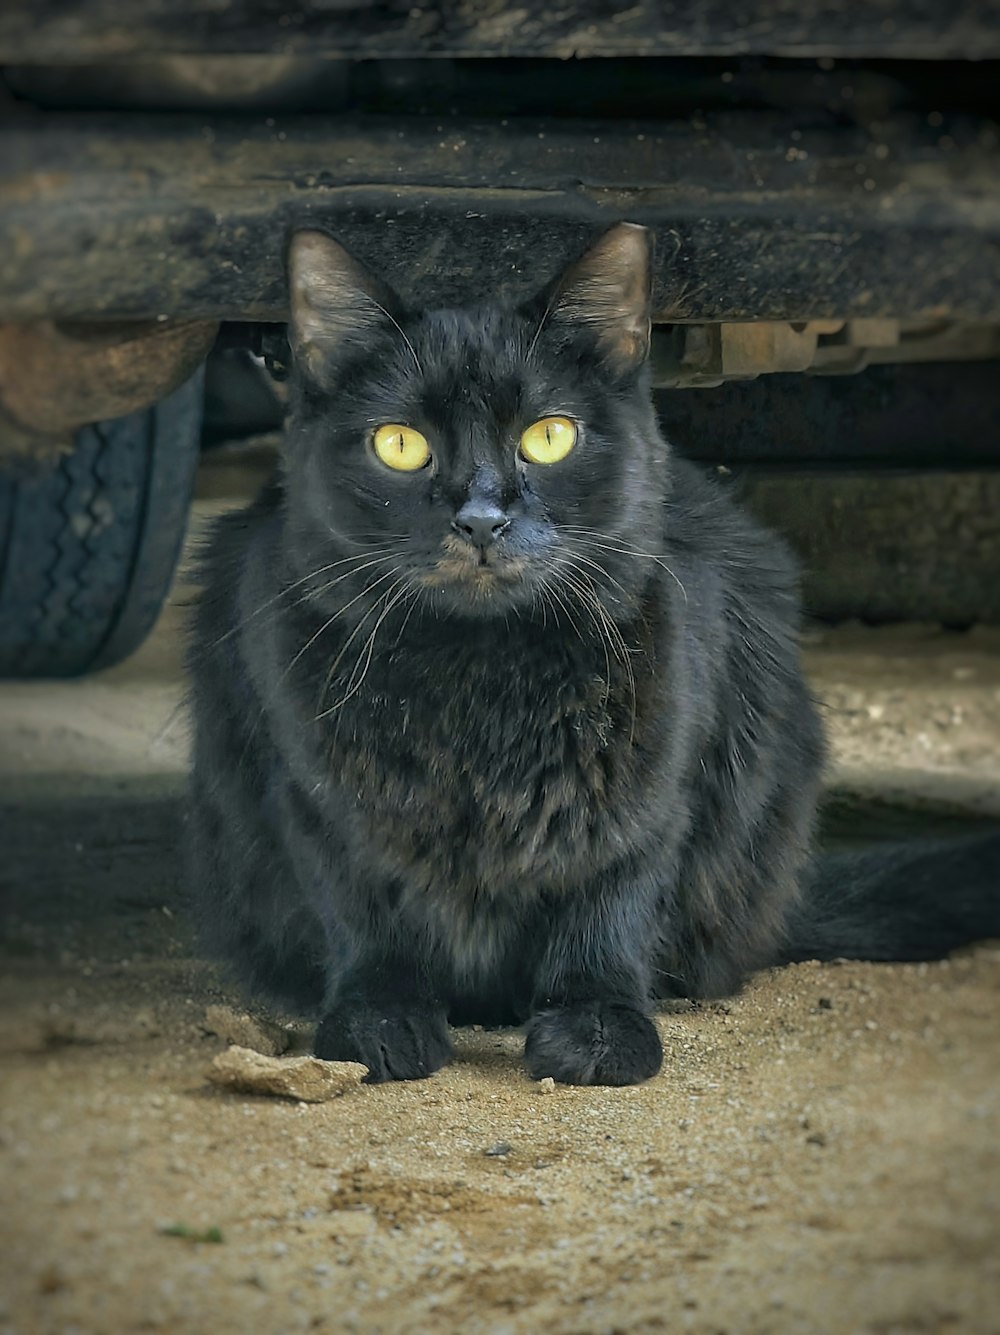 a black cat with yellow eyes sitting under a car